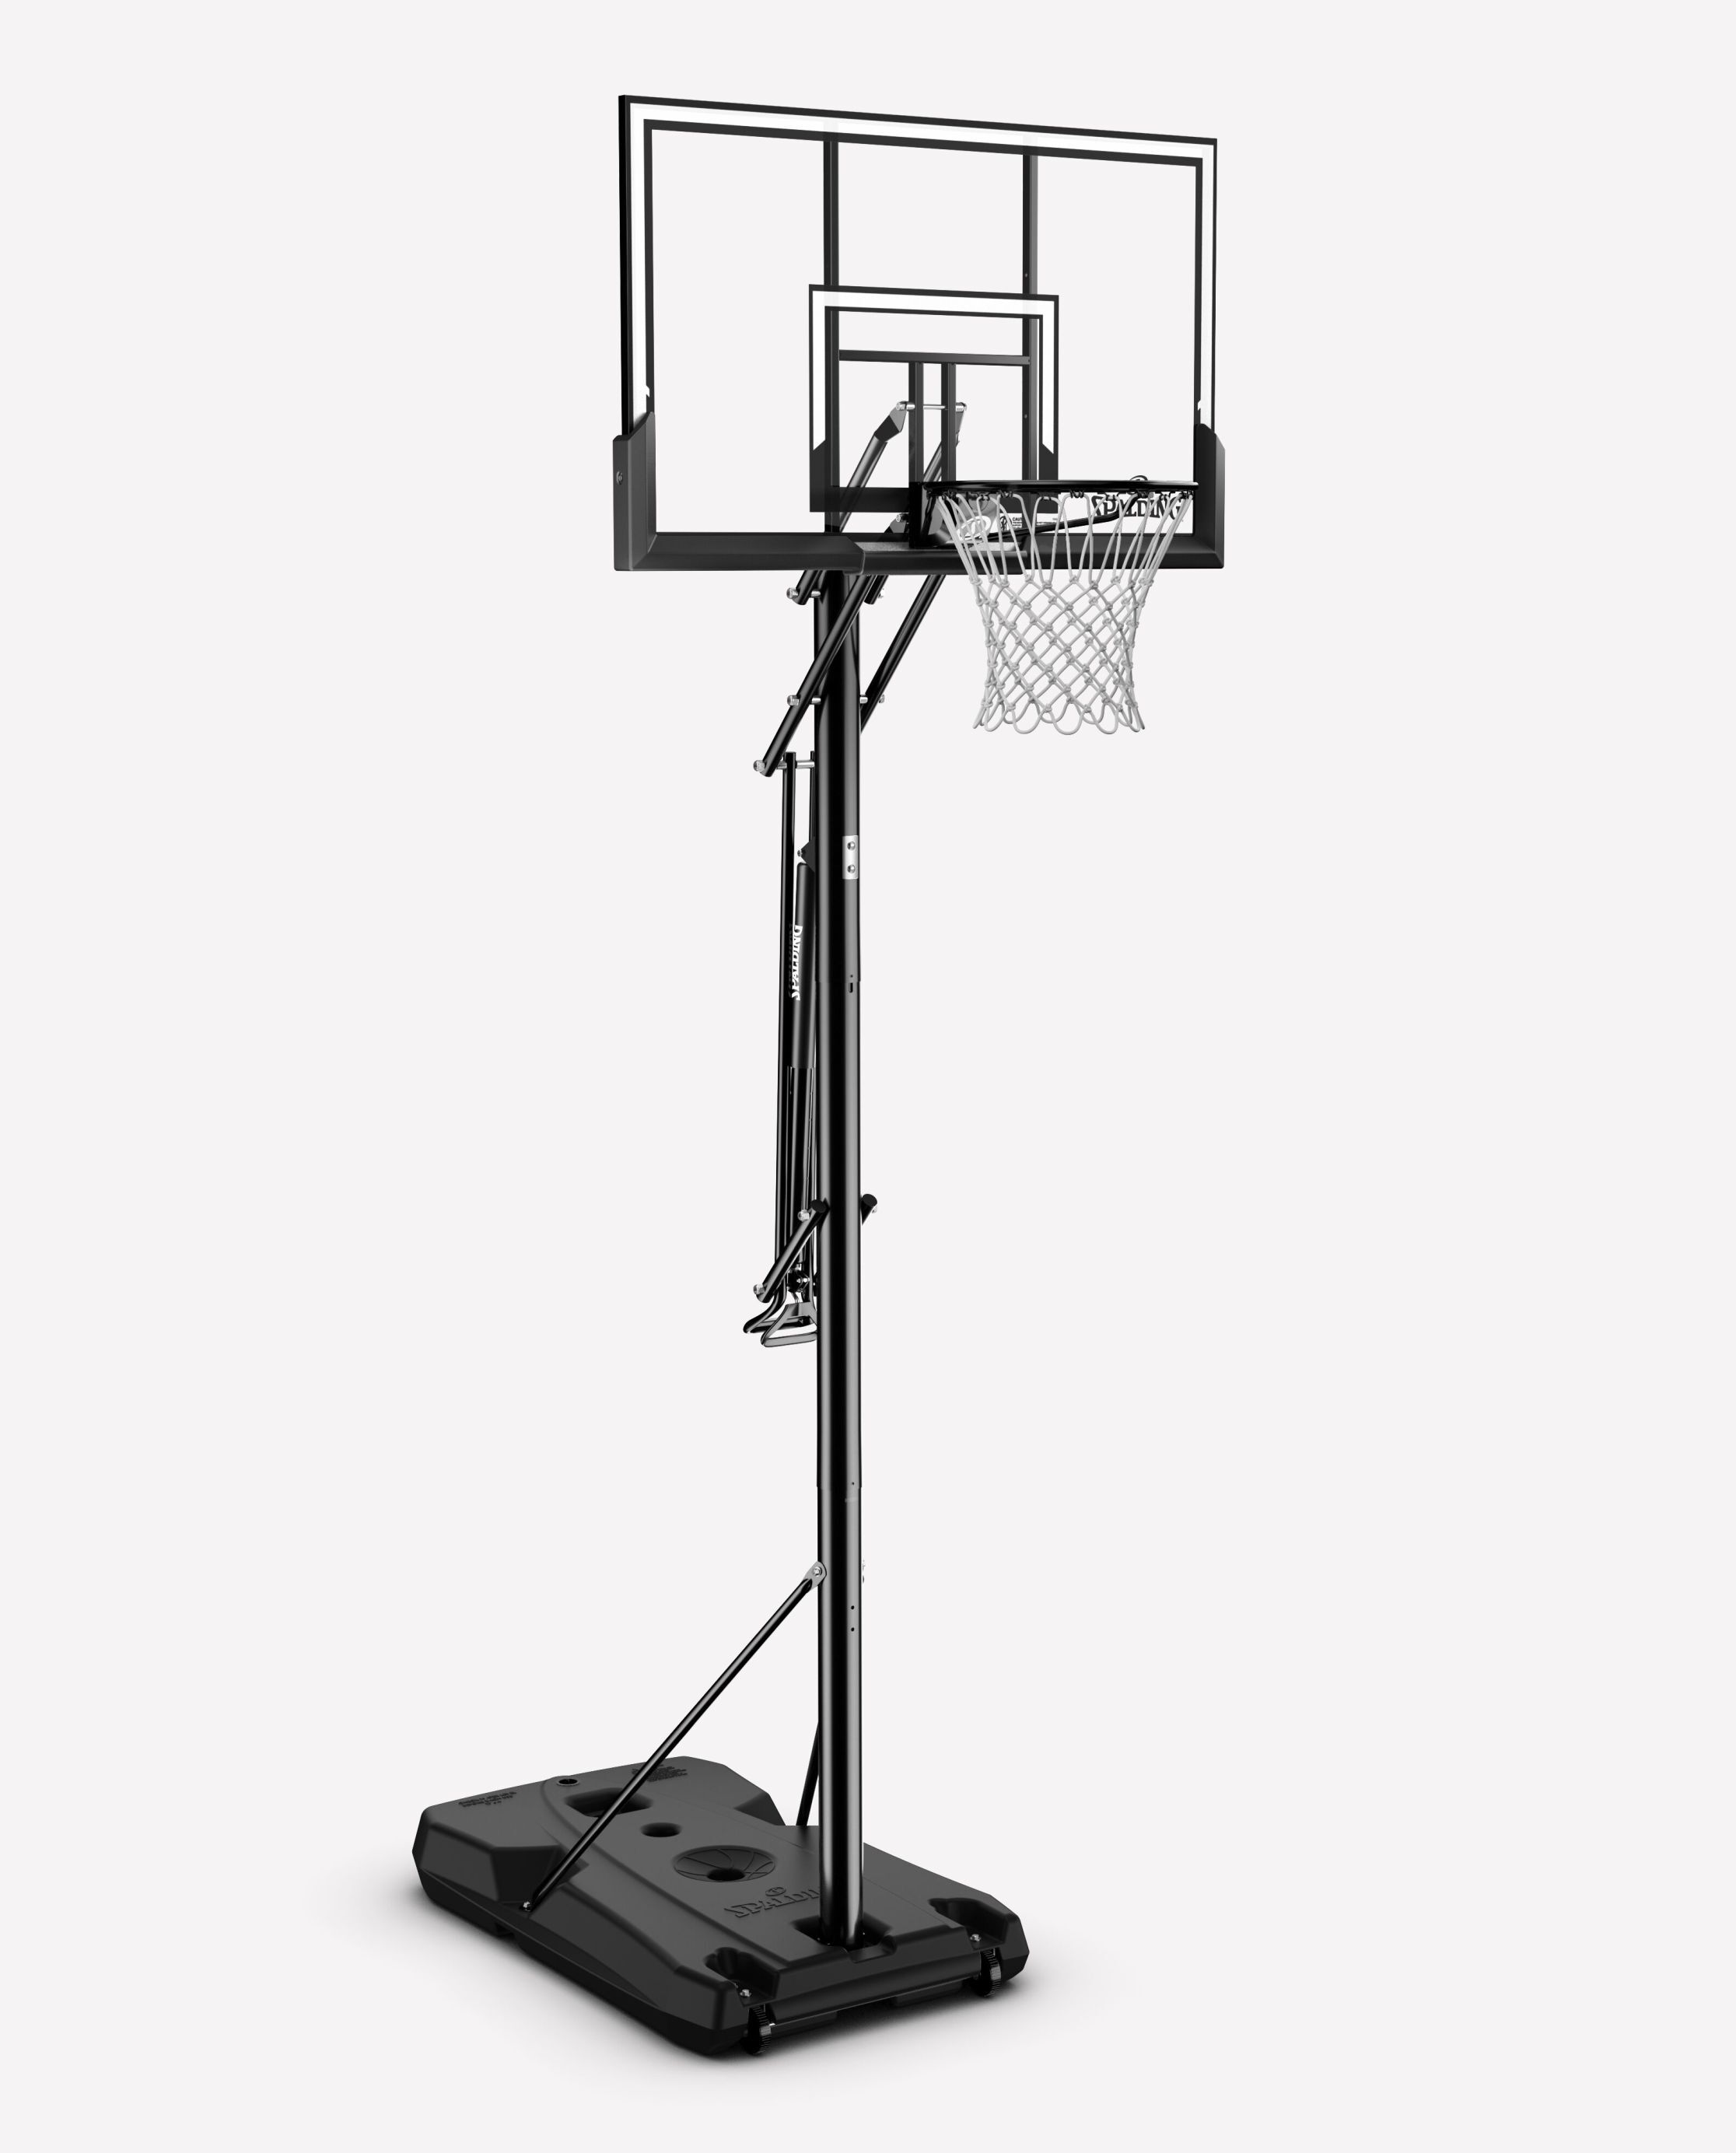 Touch Fish Extra Large Basketball Hoop 18”X 12” Pre-Assembled Portable Over The Door with Flex Rim Includes One Deflated 5.9” Mini Basketball with Pump for Indoor 